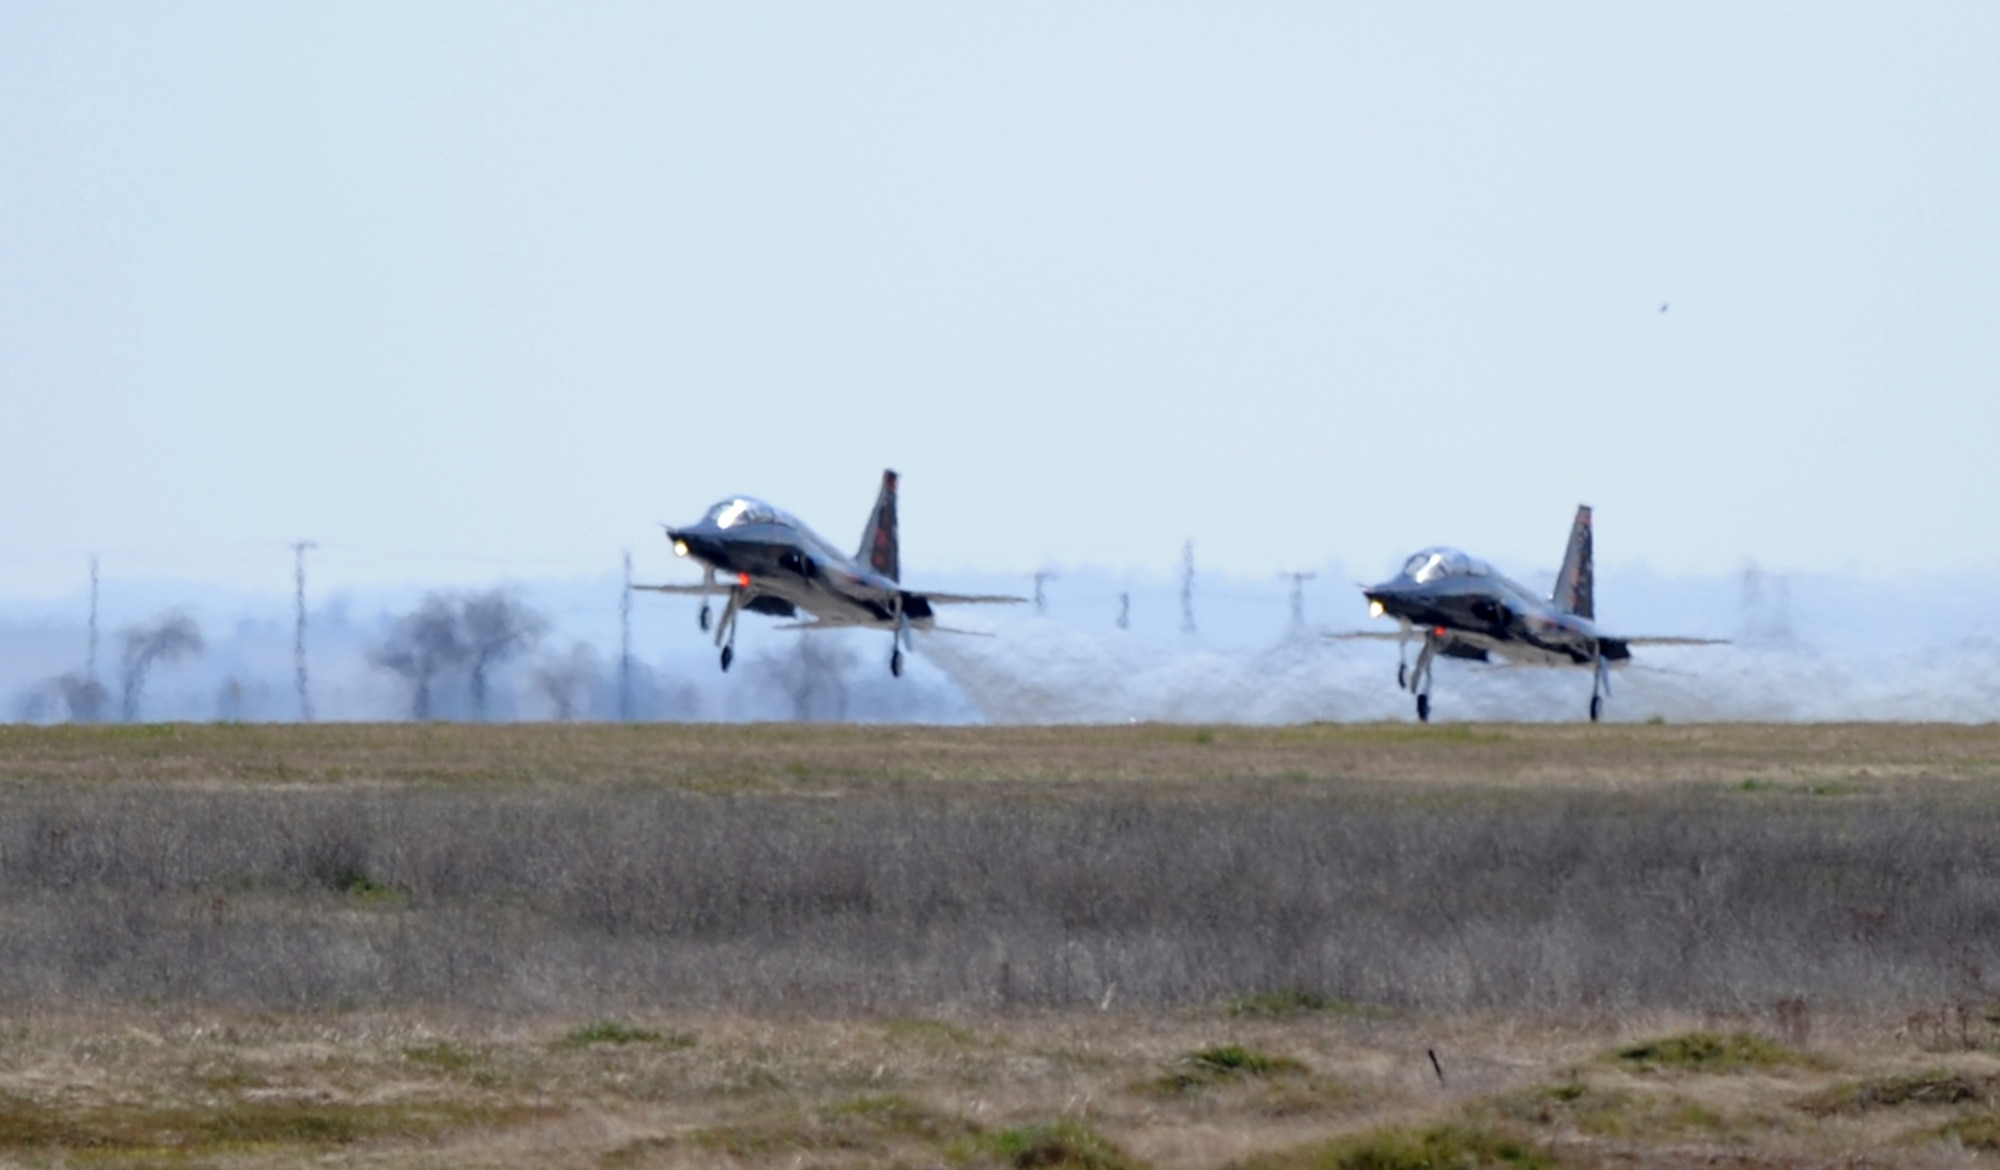 Two T-38 Talon jet trainer aircraft prepare to take off at Beale Air Force Base, Calif., Feb. 28, 2013. The Talon only needs 2,300 feet of runway to take off. (U.S. Air Force photo by Staff Sgt. Robert M. Trujillo/Released)